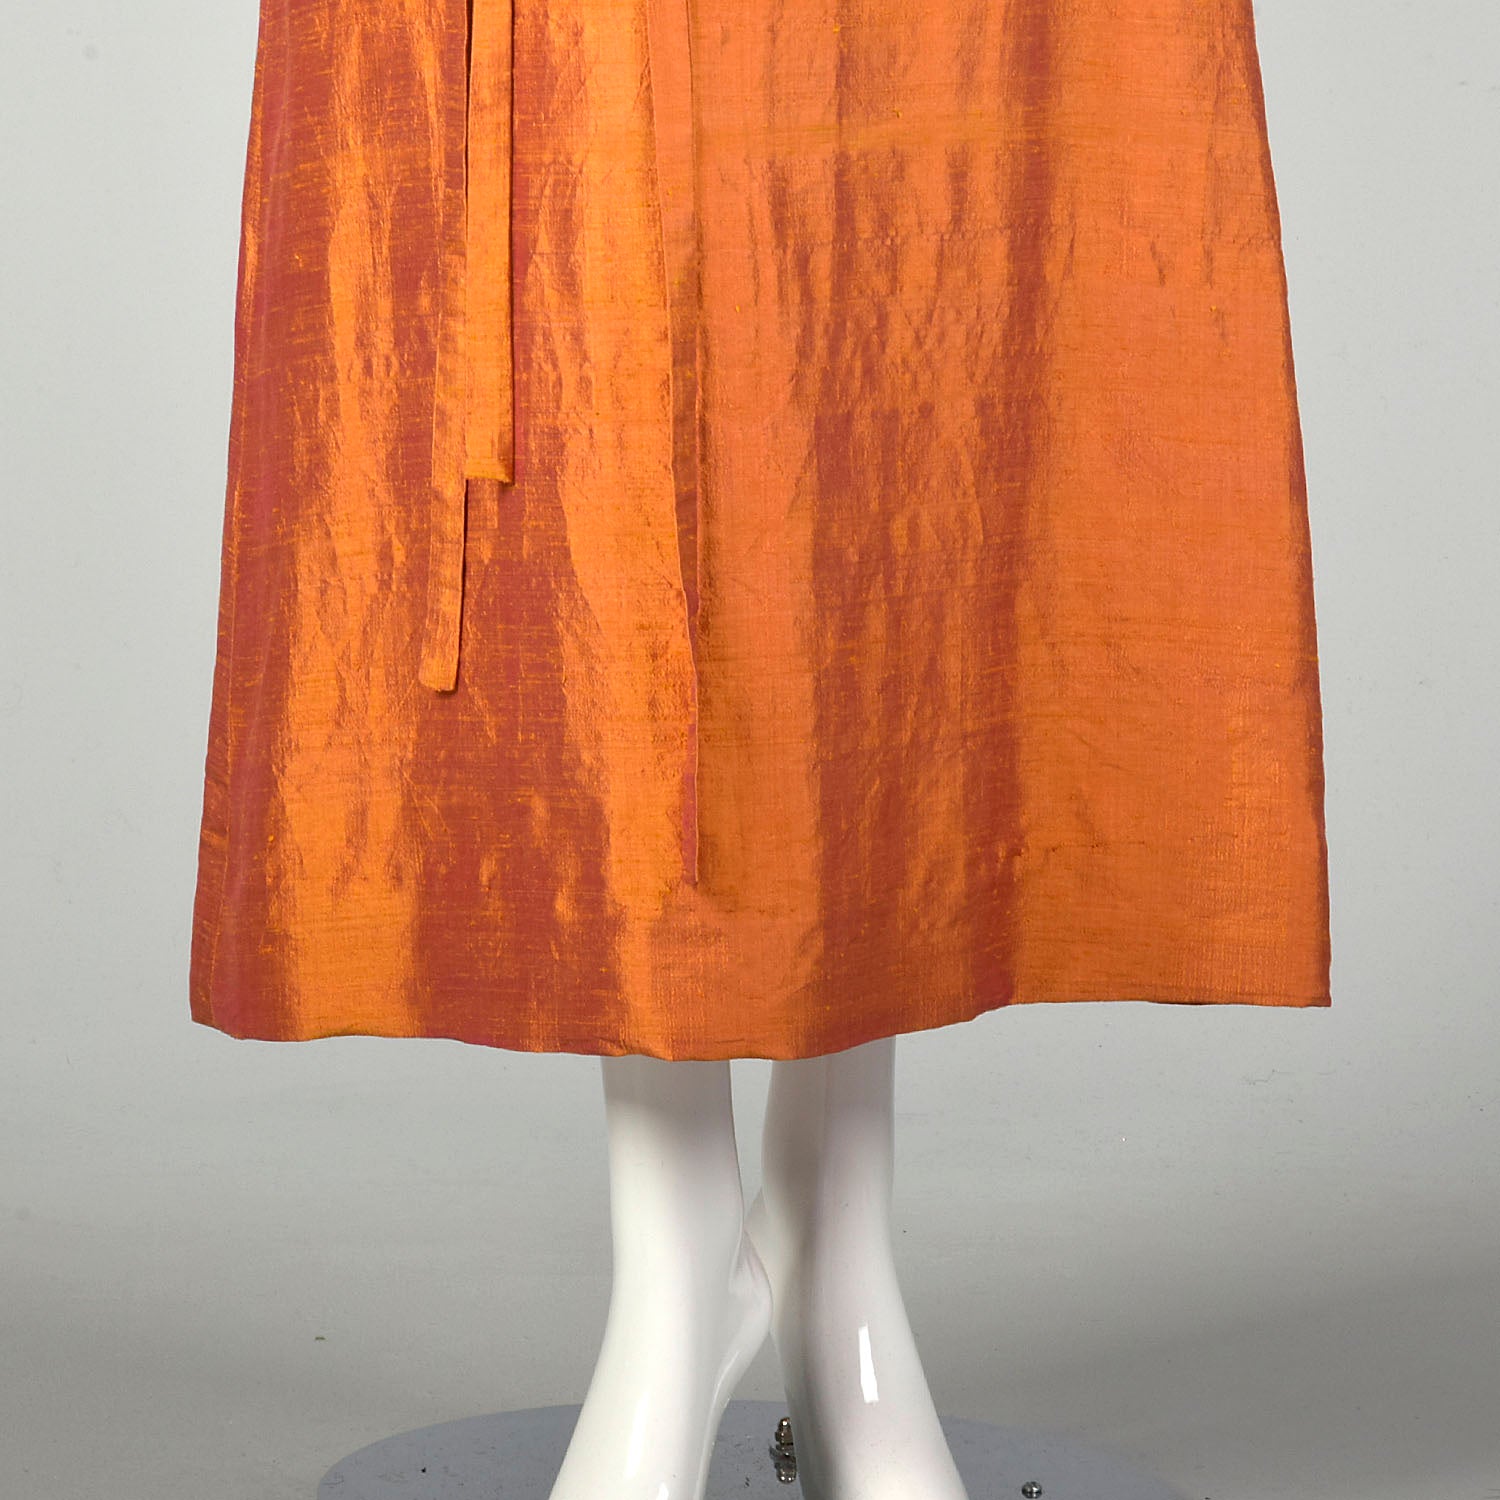 Small 1990s Orange Red Gold Silk Dupioni Sharkskin Dress with Belt and Accessories